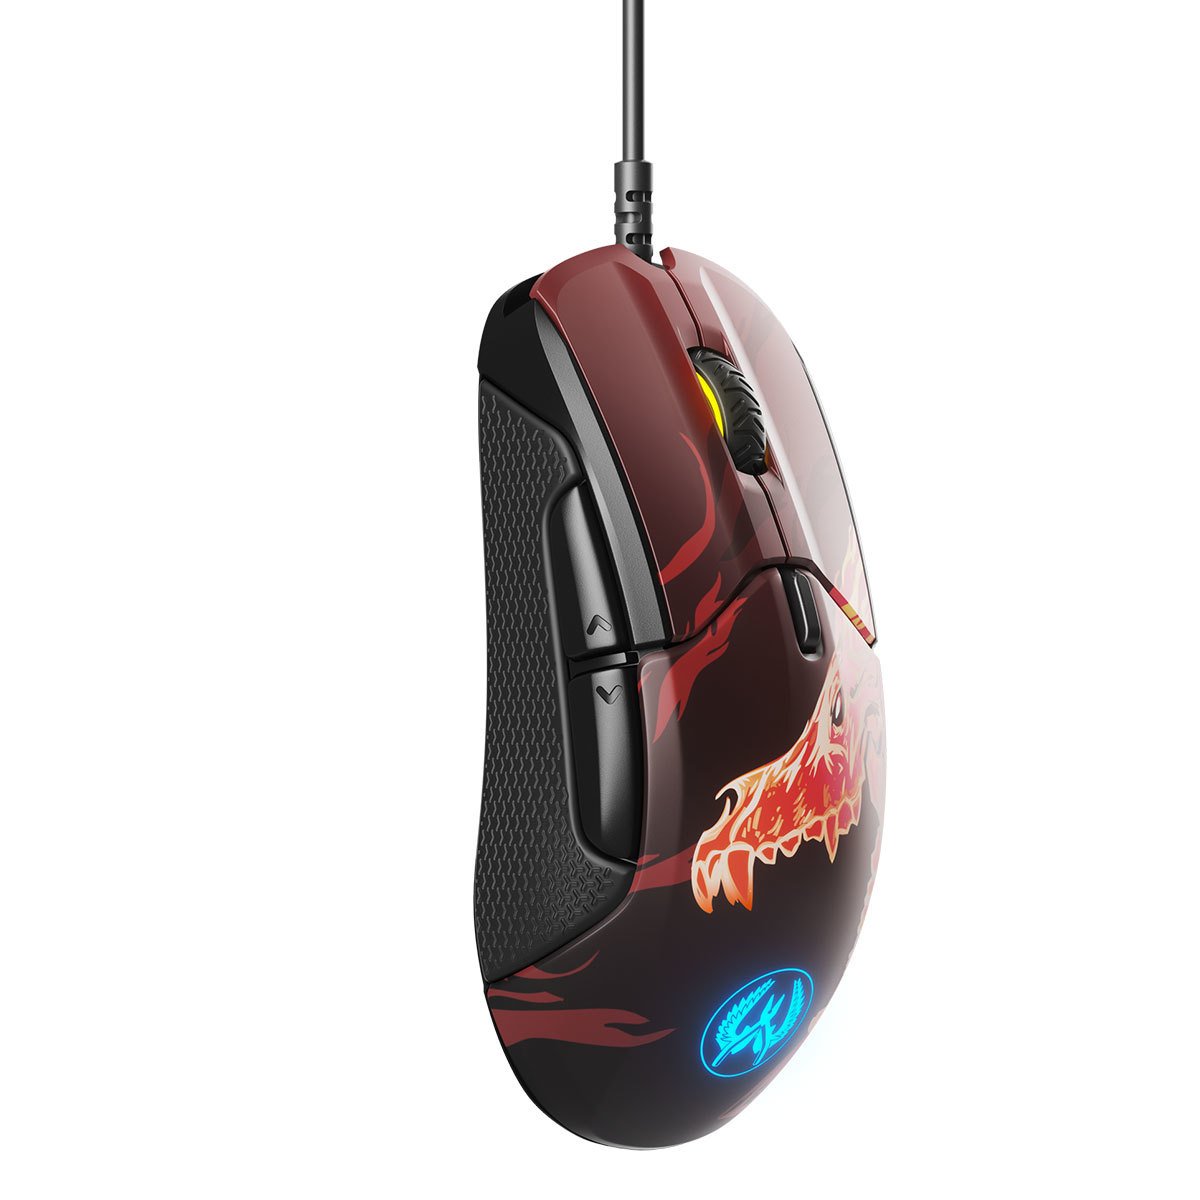 CHUỘT STEELSERIES RIVAL310